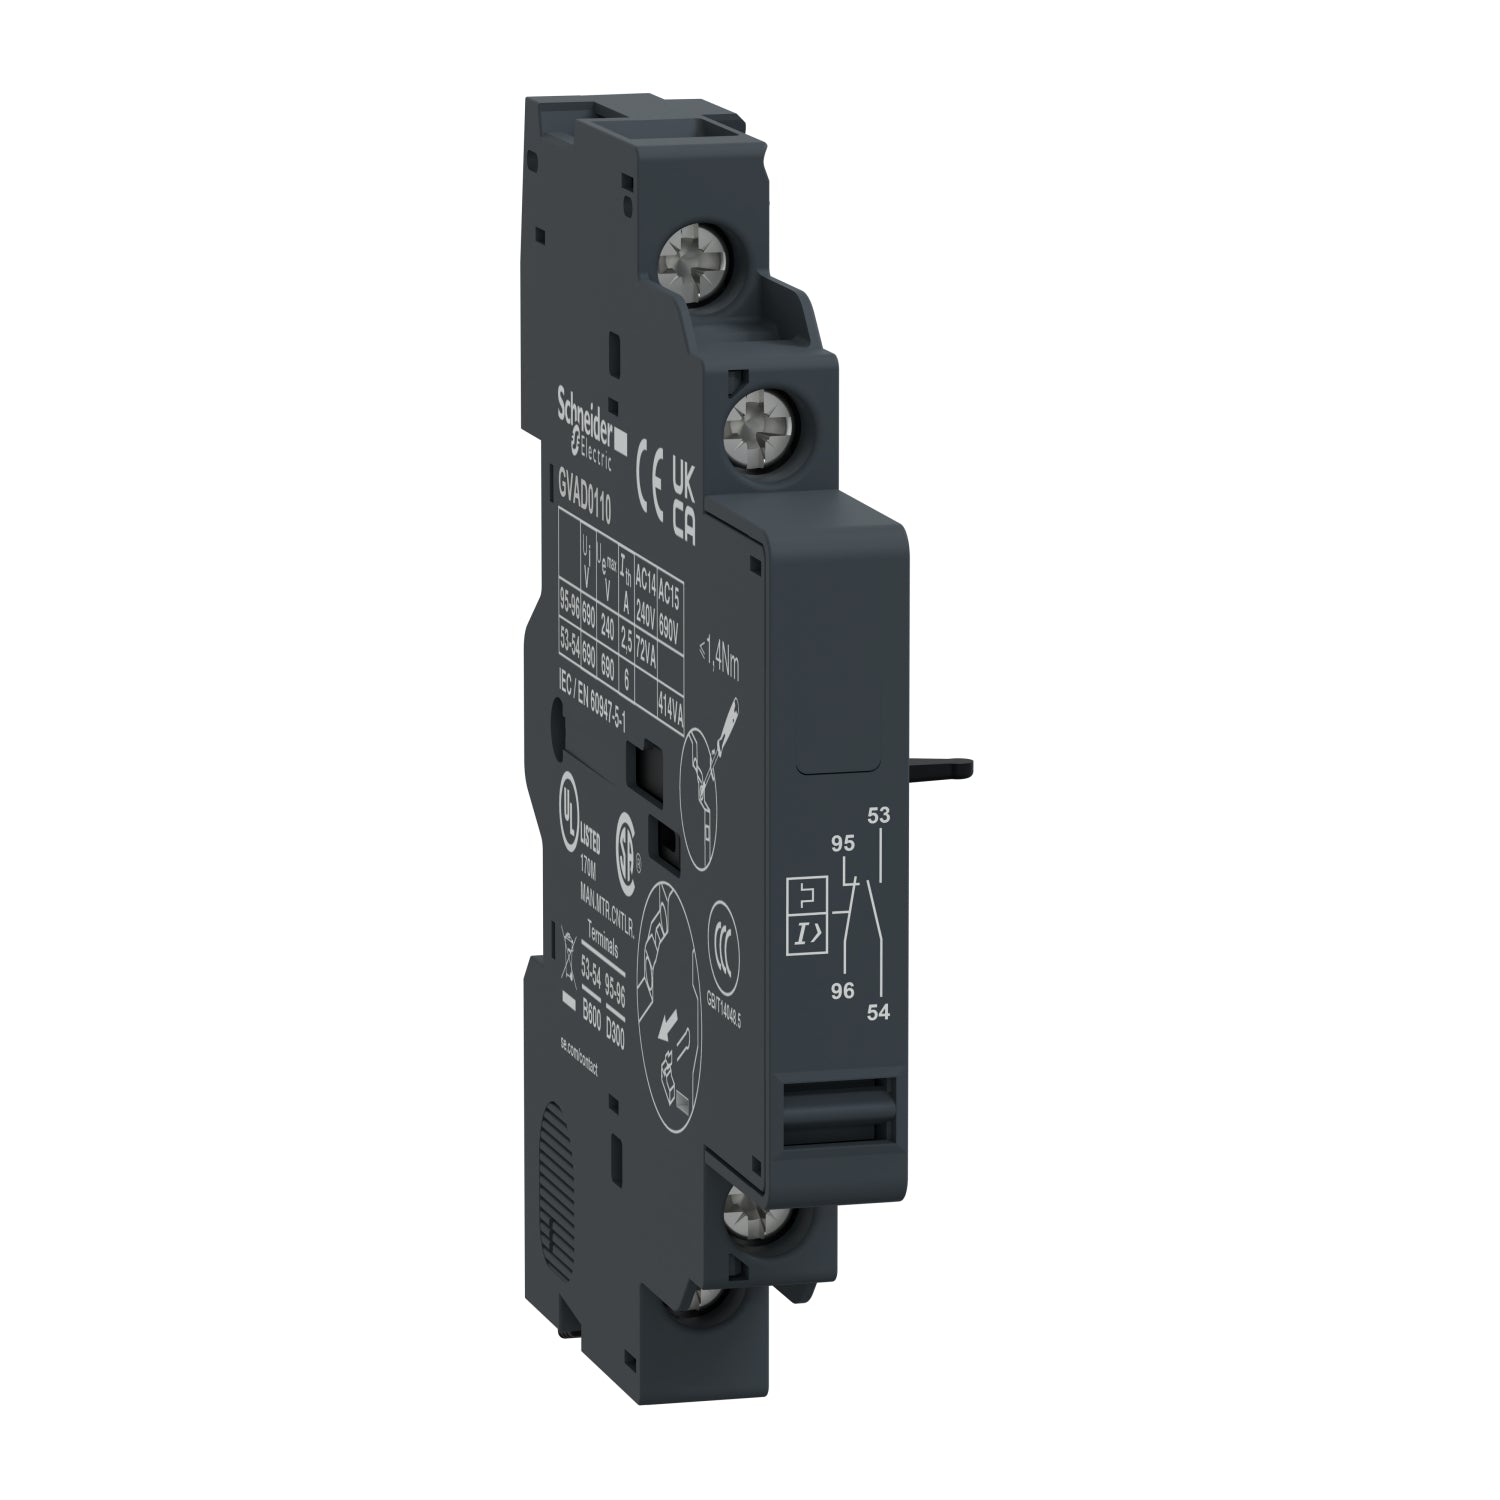 GVAD0110 | Schneider Electric | TeSys Deca - auxiliary contact - 1 NO + 1 NC (fault)